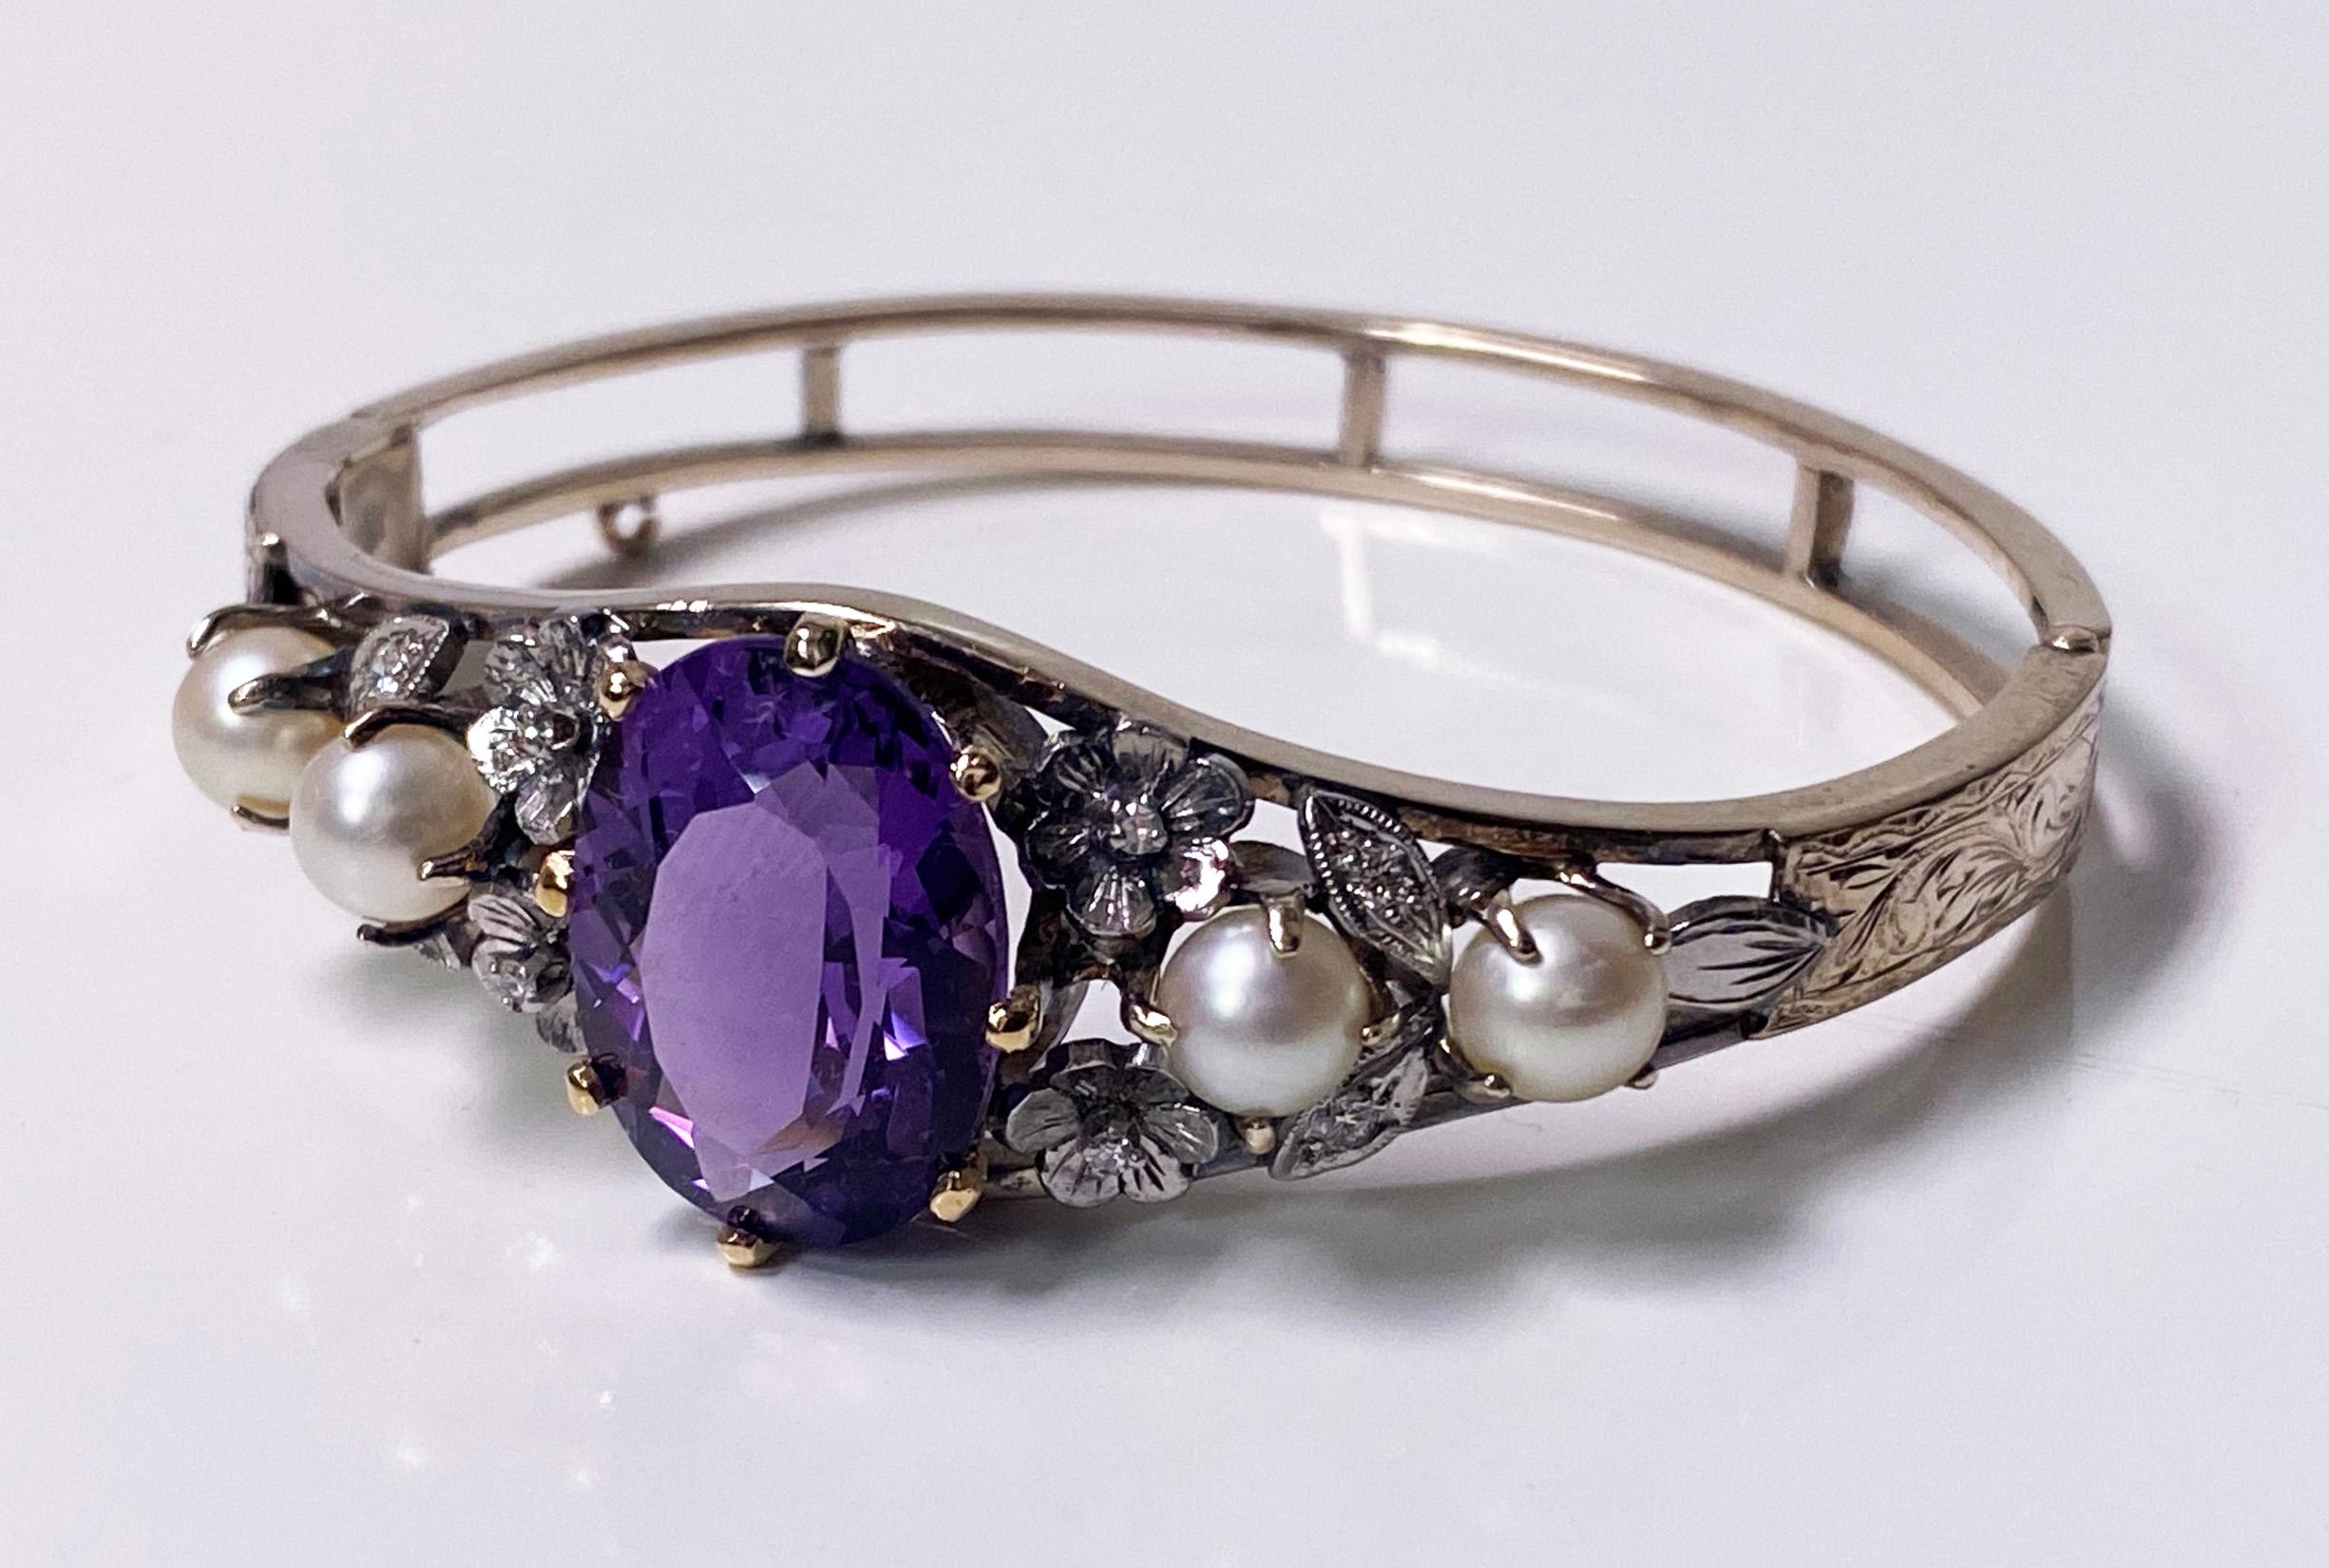 Amethyst Diamond Pearl Gold Bangle C.1930. 14K yellow and white gold, the centre with a fine medium purple Amethyst gauging approximately 17 x 13 x 9.2 mm, approximately 17 cts, four cultured pearls silver white, average 6.00 mm, four brilliant cut